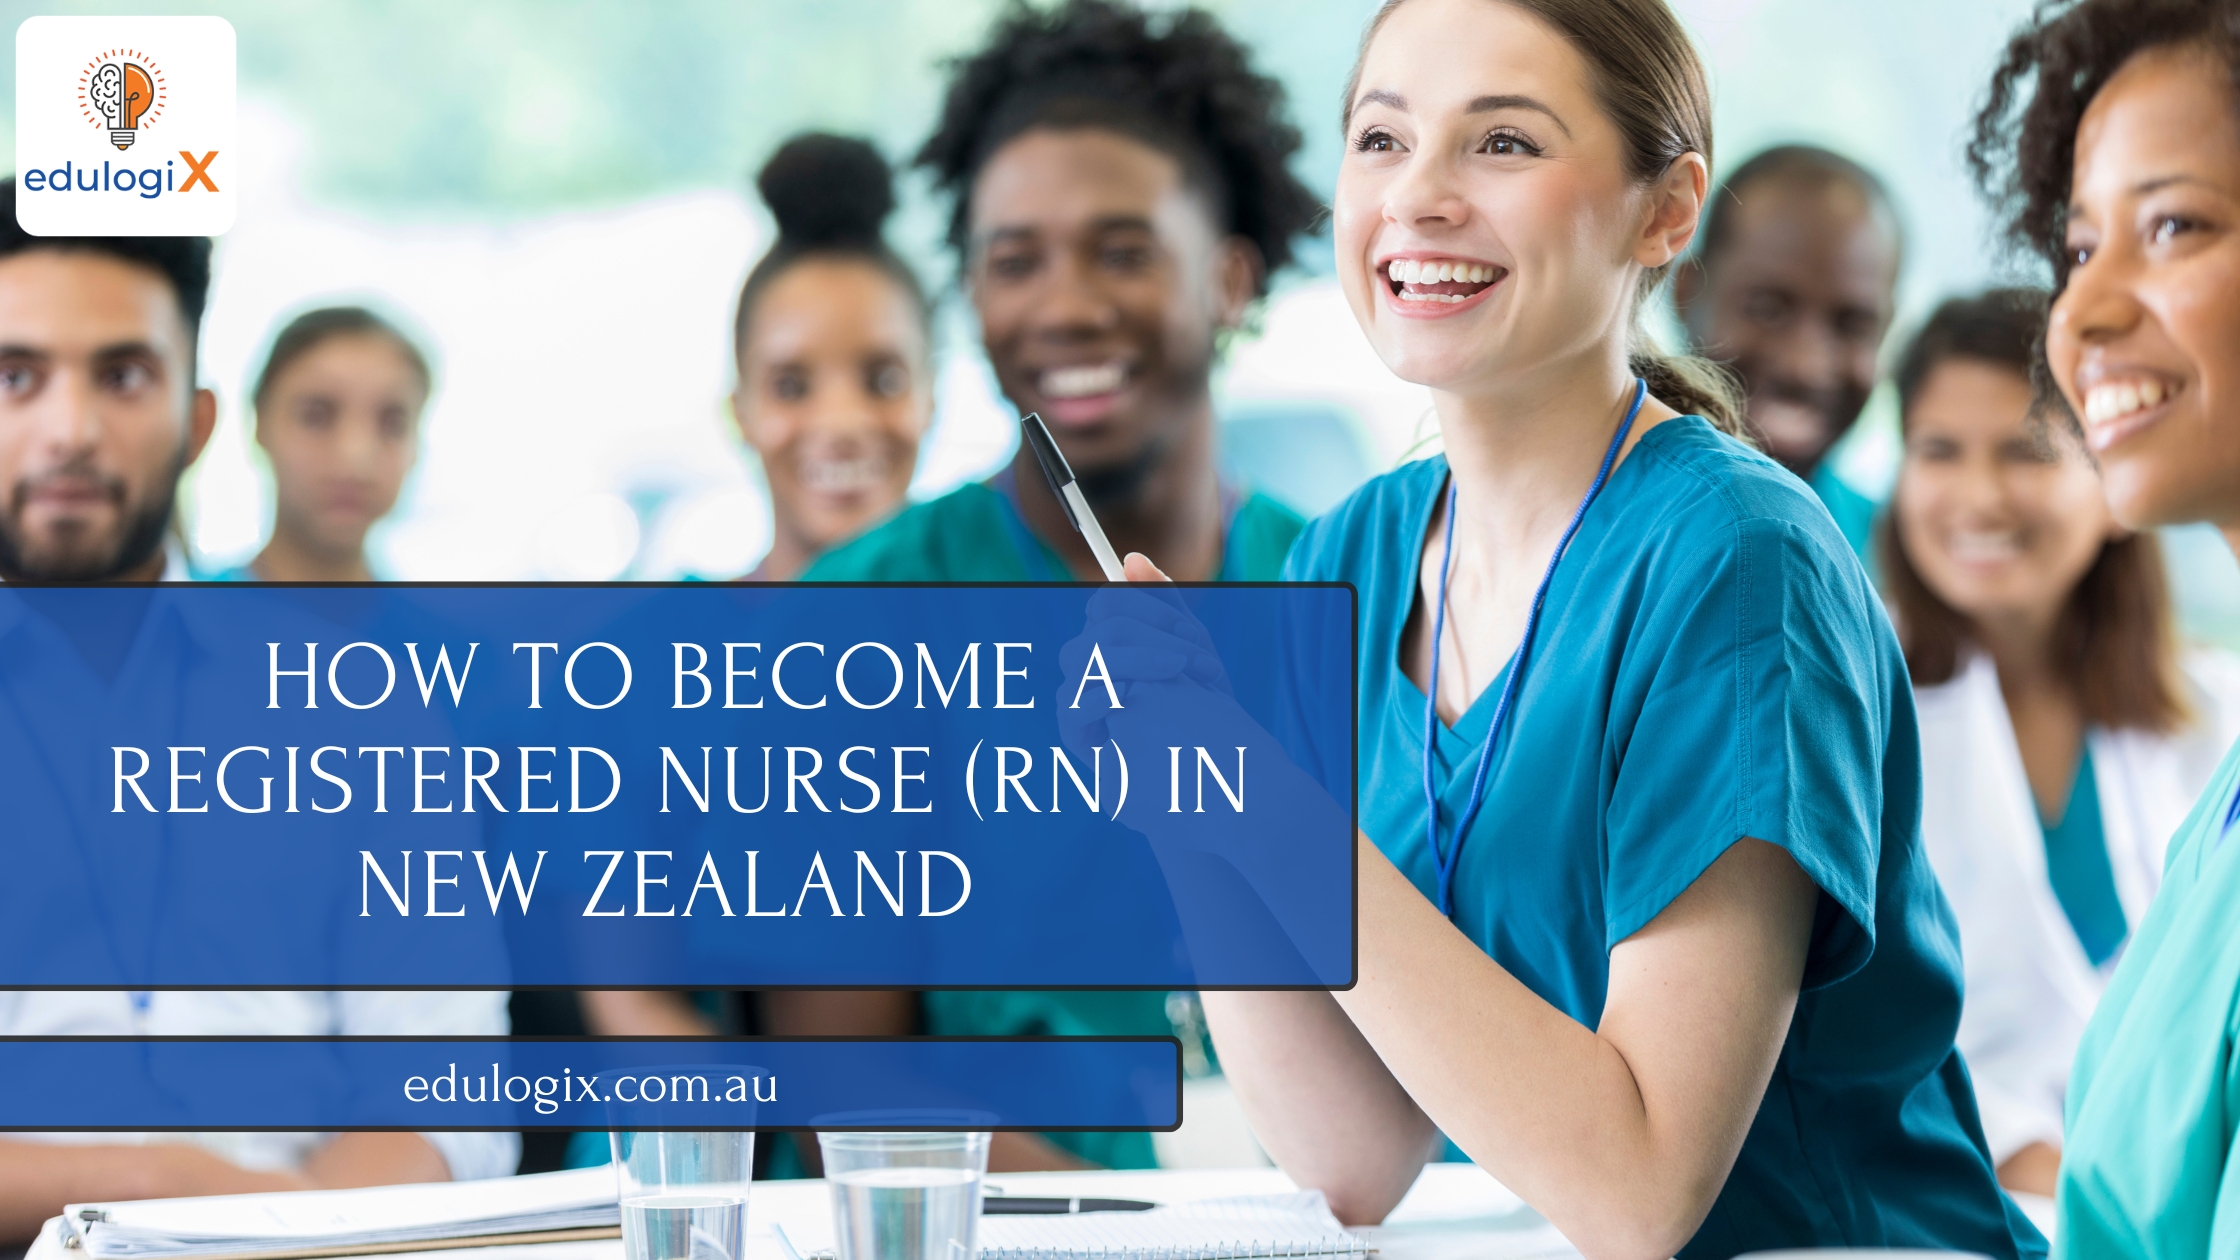 How to Become a Registered Nurse (RN) in New Zealand